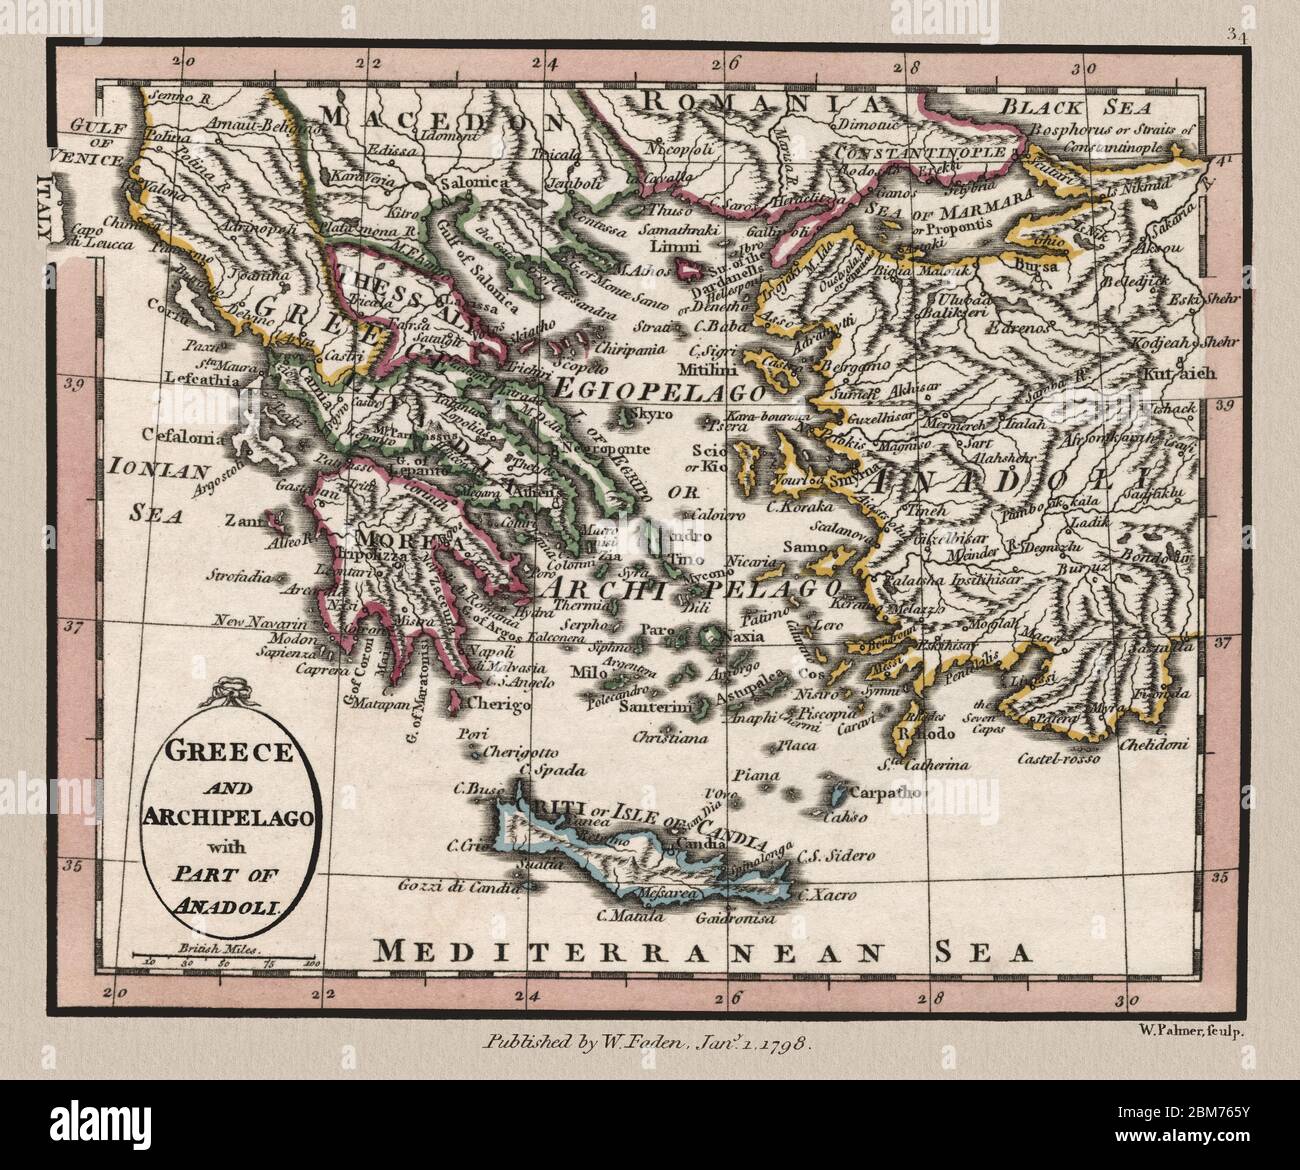 'Greece and Archipelago.' Detailed map shows Greece in 1804. The map shows mainland Greece, the archipelago in the Aegean Sea, and Anadoli, which is modern-day Turkey. This is a beautifully detailed historic map reproduction. Original from a British atlas published by famed cartographer William Faden. Stock Photo